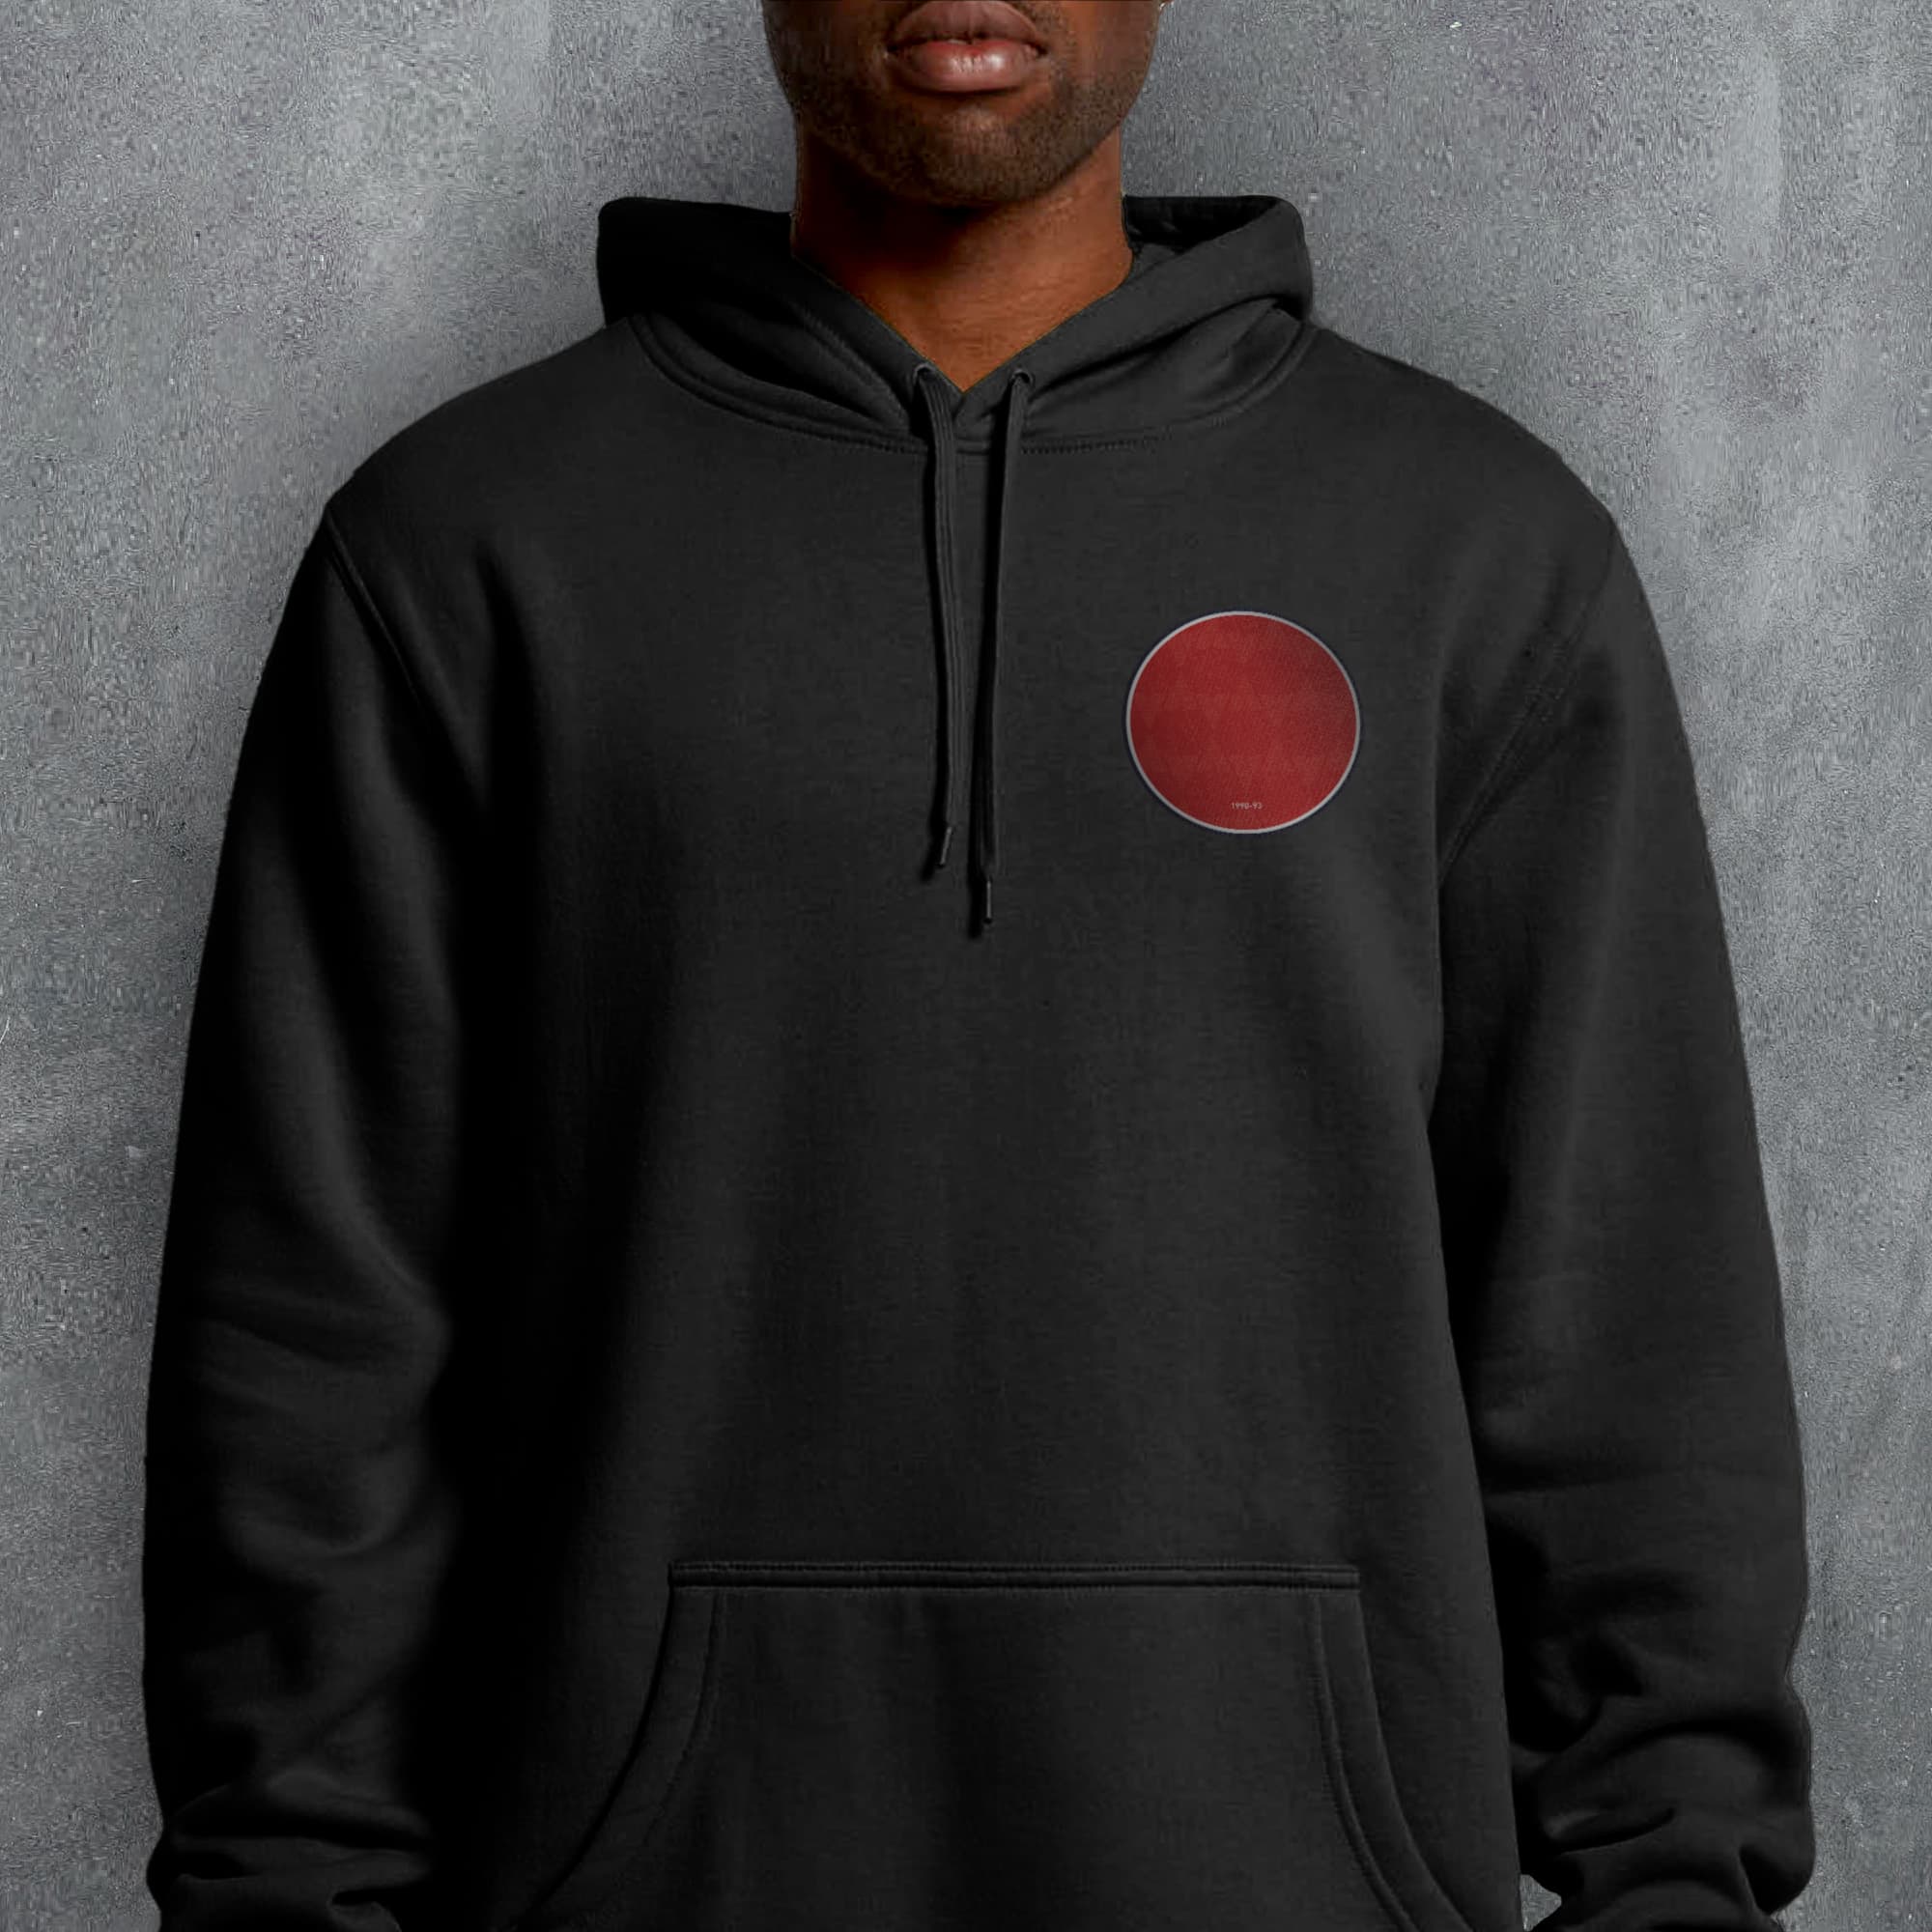 a man wearing a black hoodie with a red circle on it